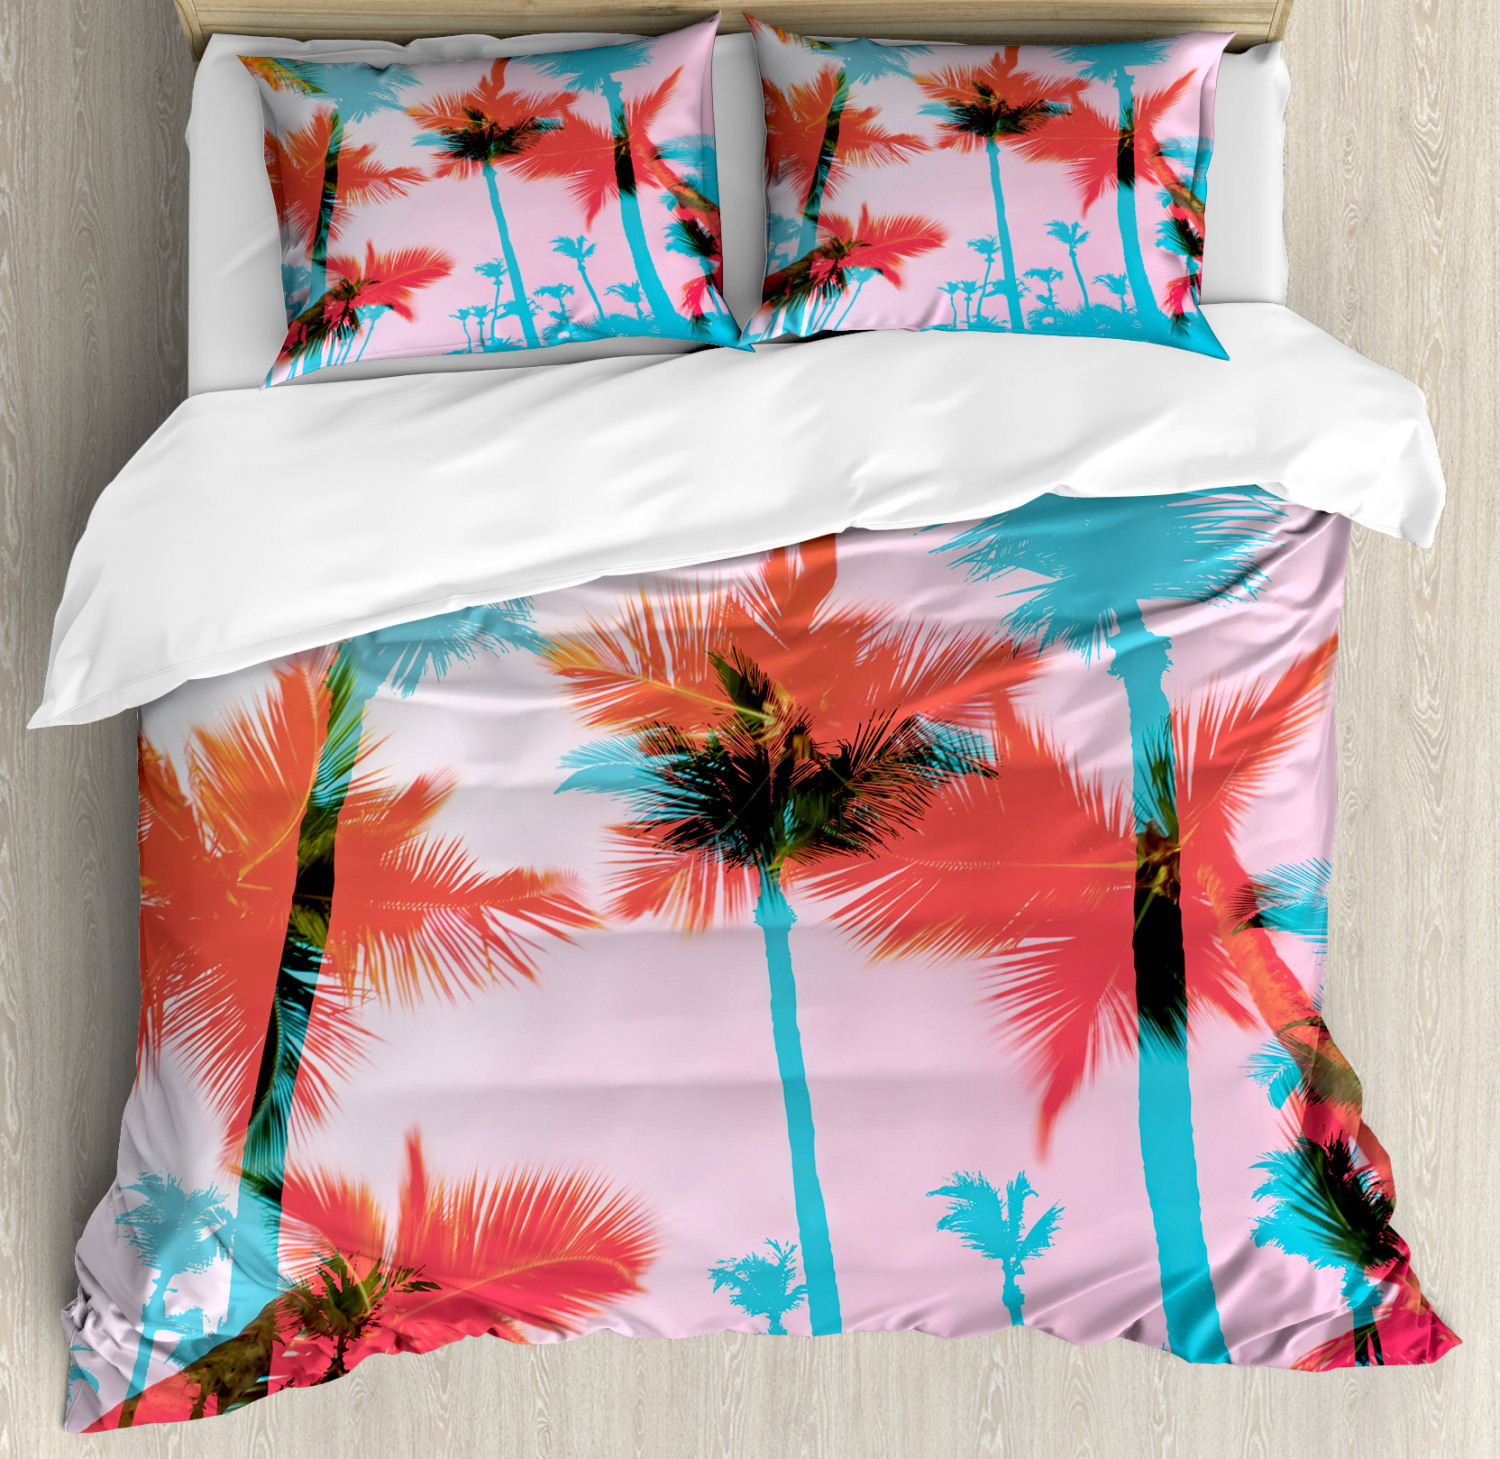 Tropical Duvet Cover Set With Pillow Shams Palm Tree Silhouettes